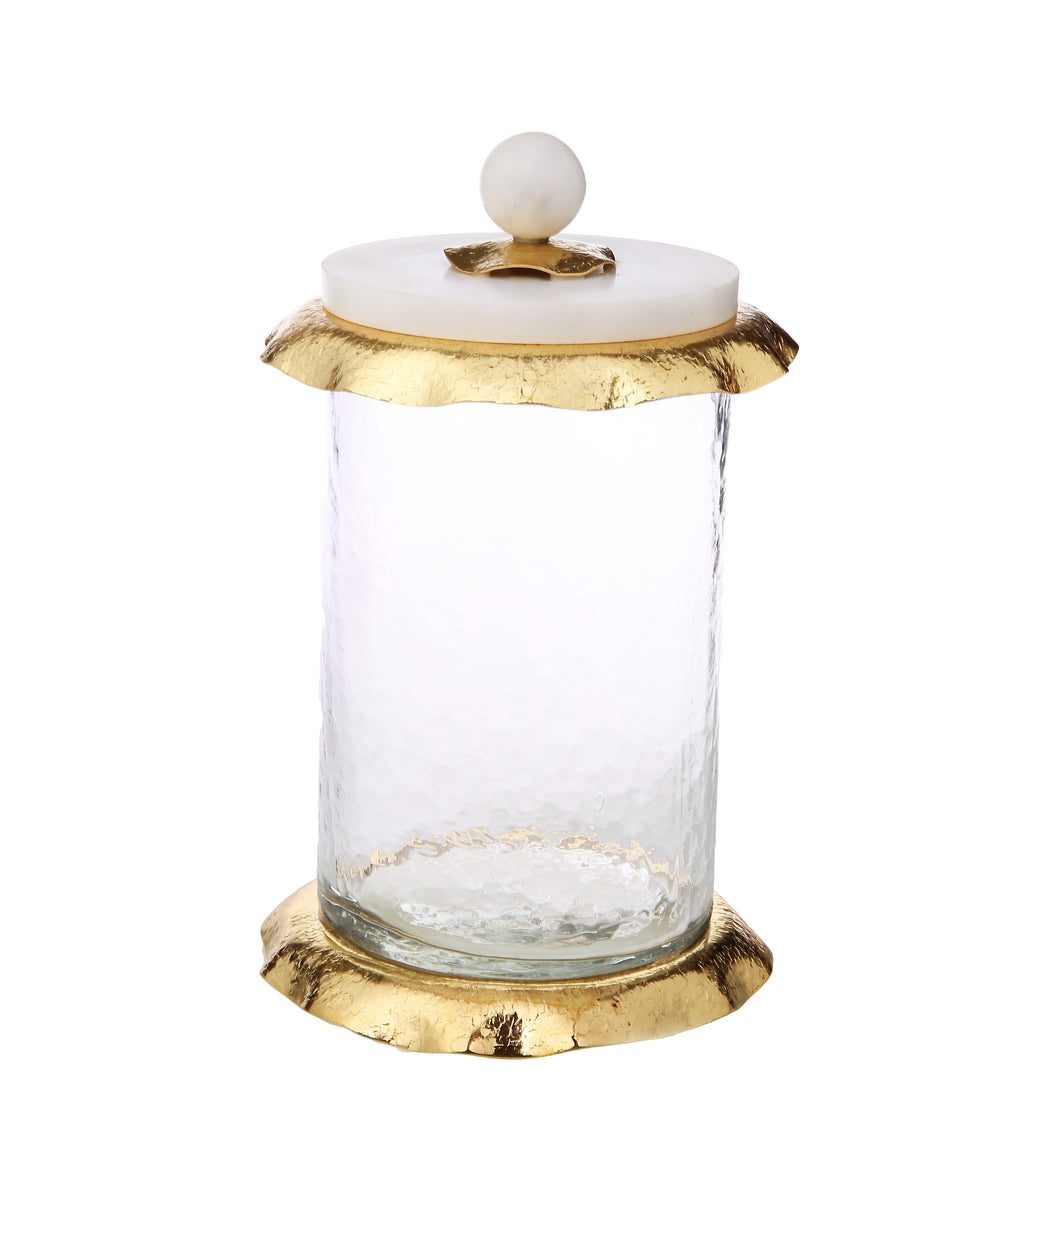 Medium Glass Canister With Marble And Gold Lid - 4.75”D x 10”H by Classic Touch